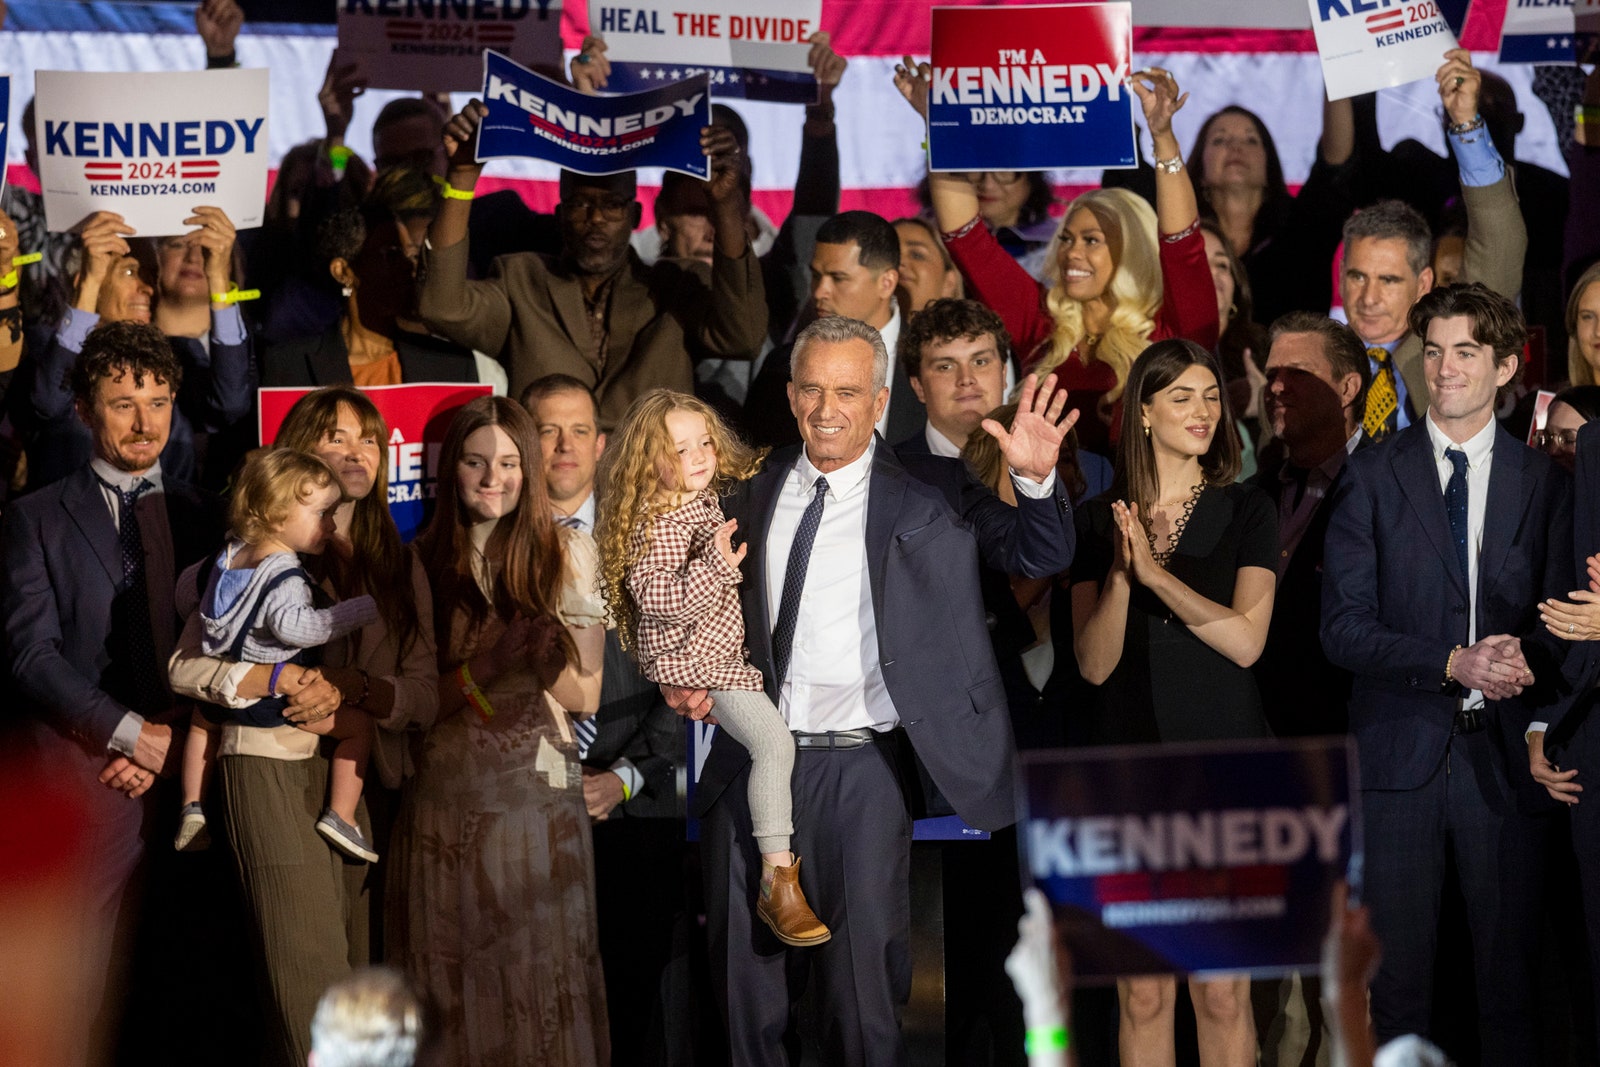 Kennedy with family and supporters as he announced his presidential candidacy in 2023.